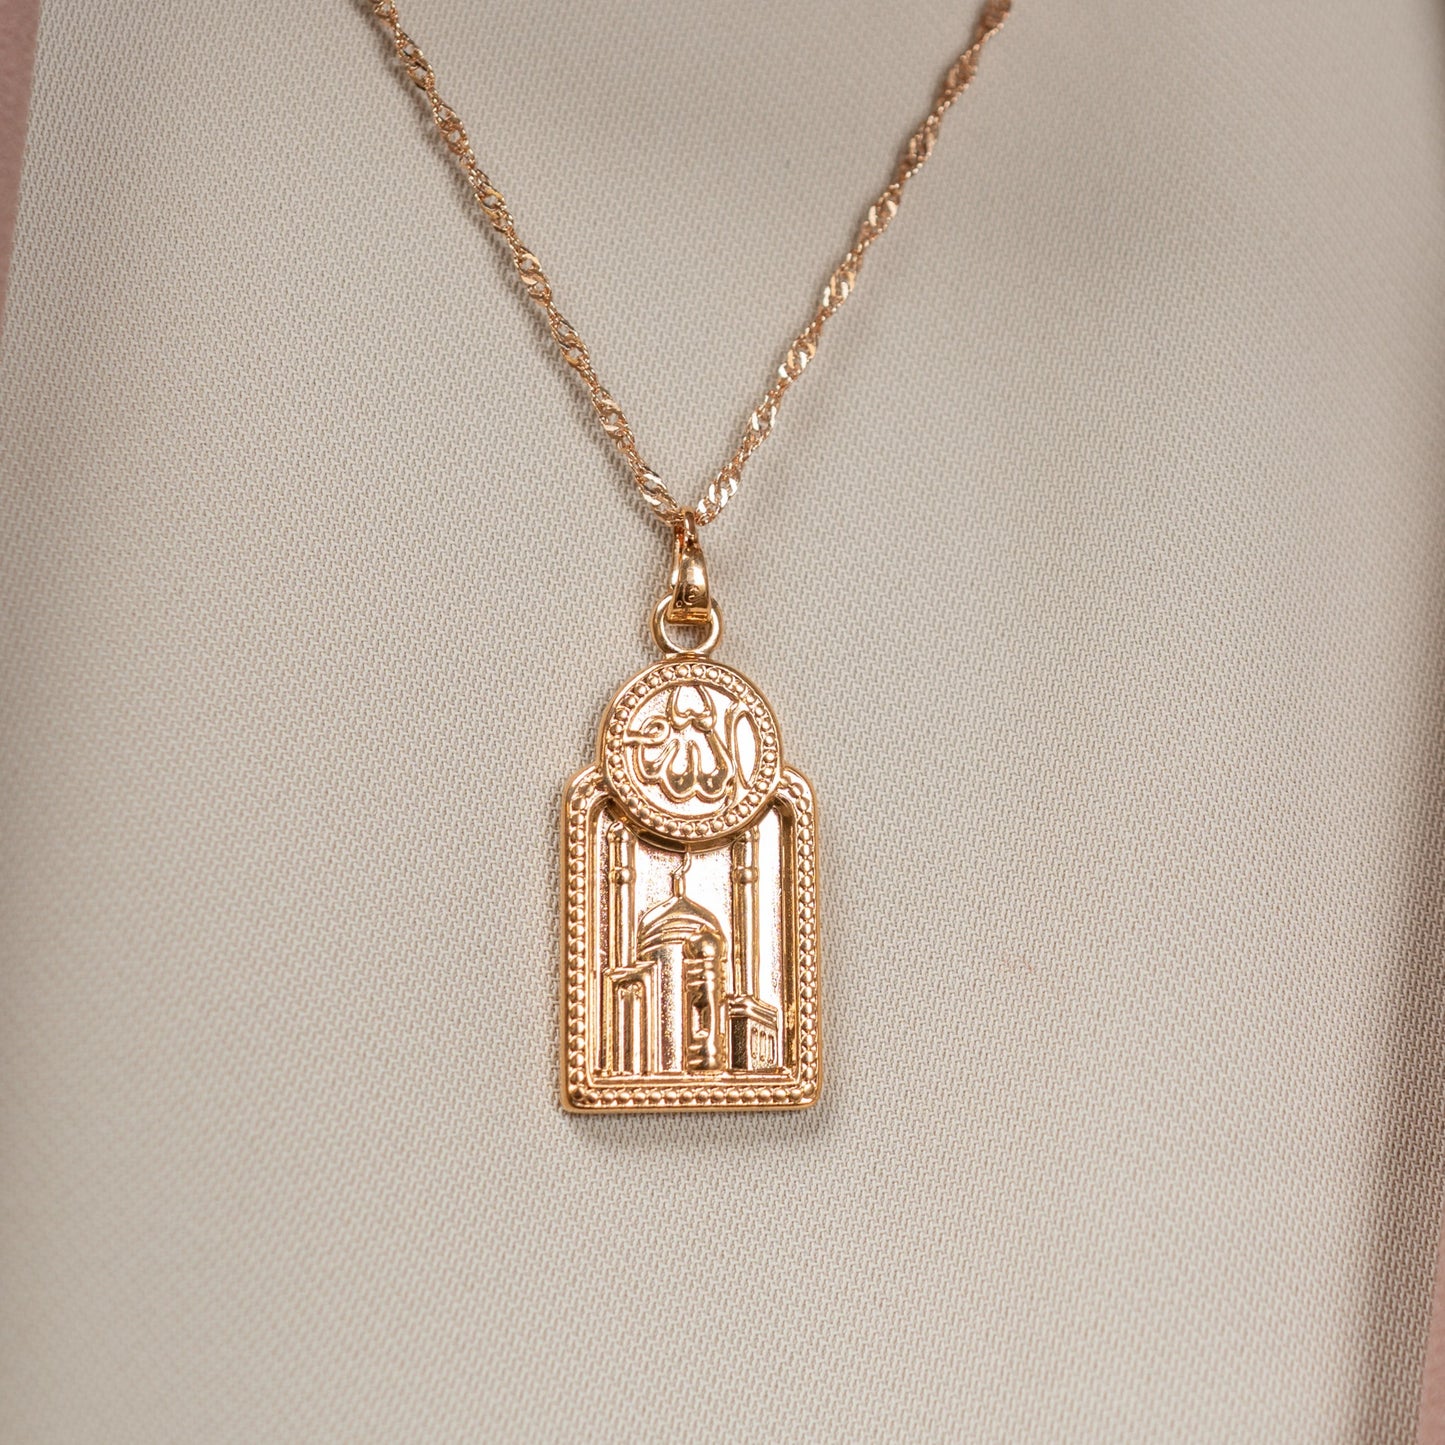 Harma Jewelry Holy Mosque gold tone Allah Necklace